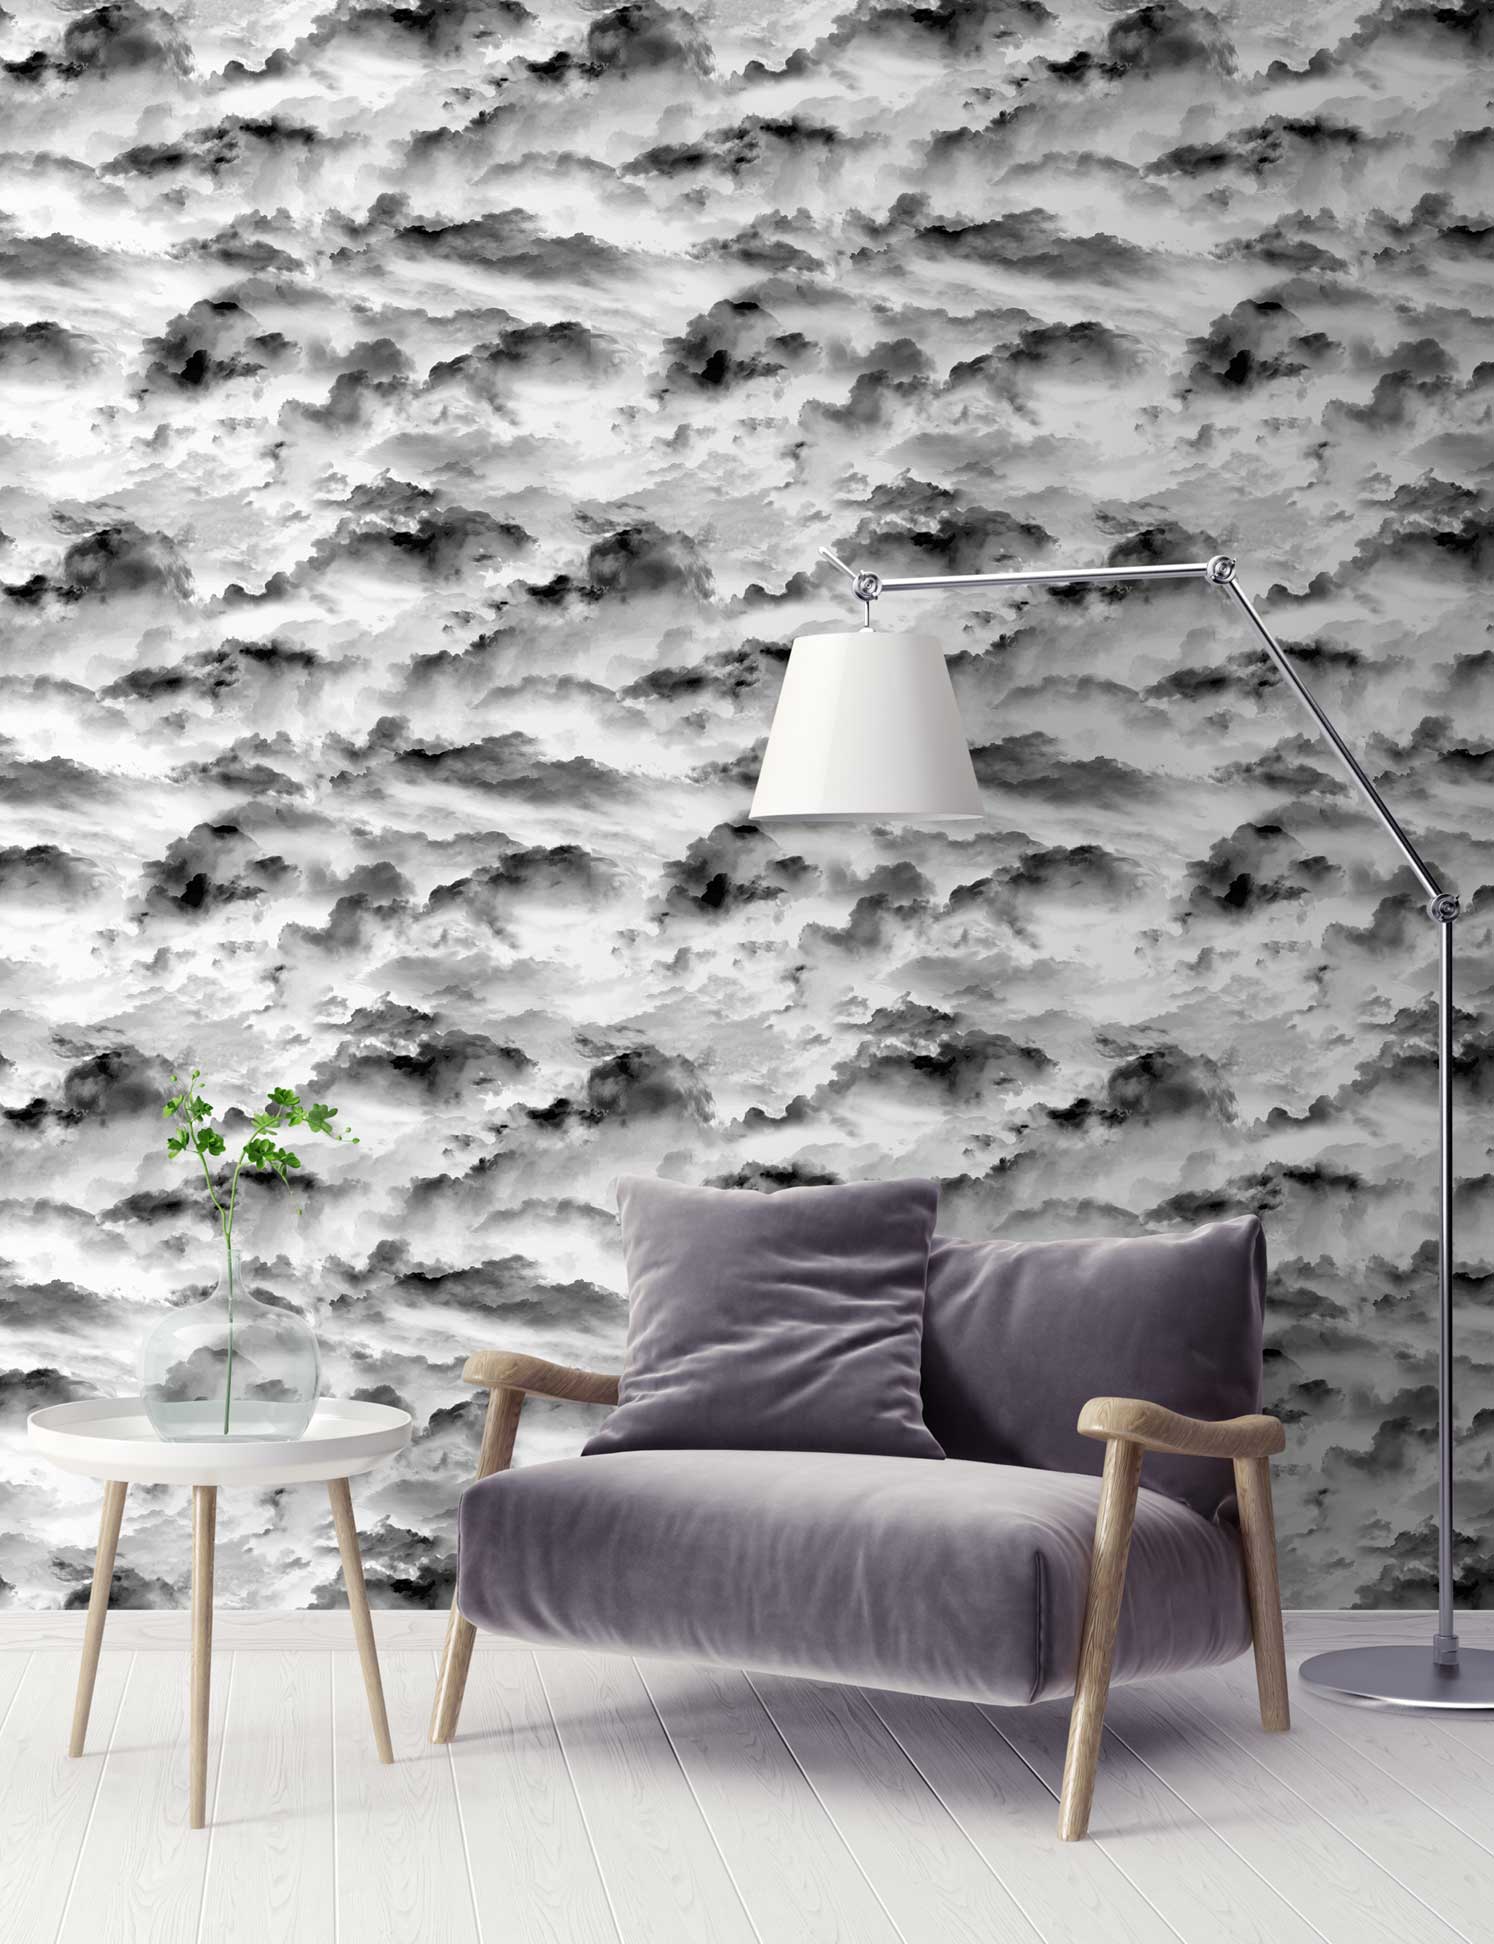 Black & White Beautiful Abstract Cloud Wallpaper 